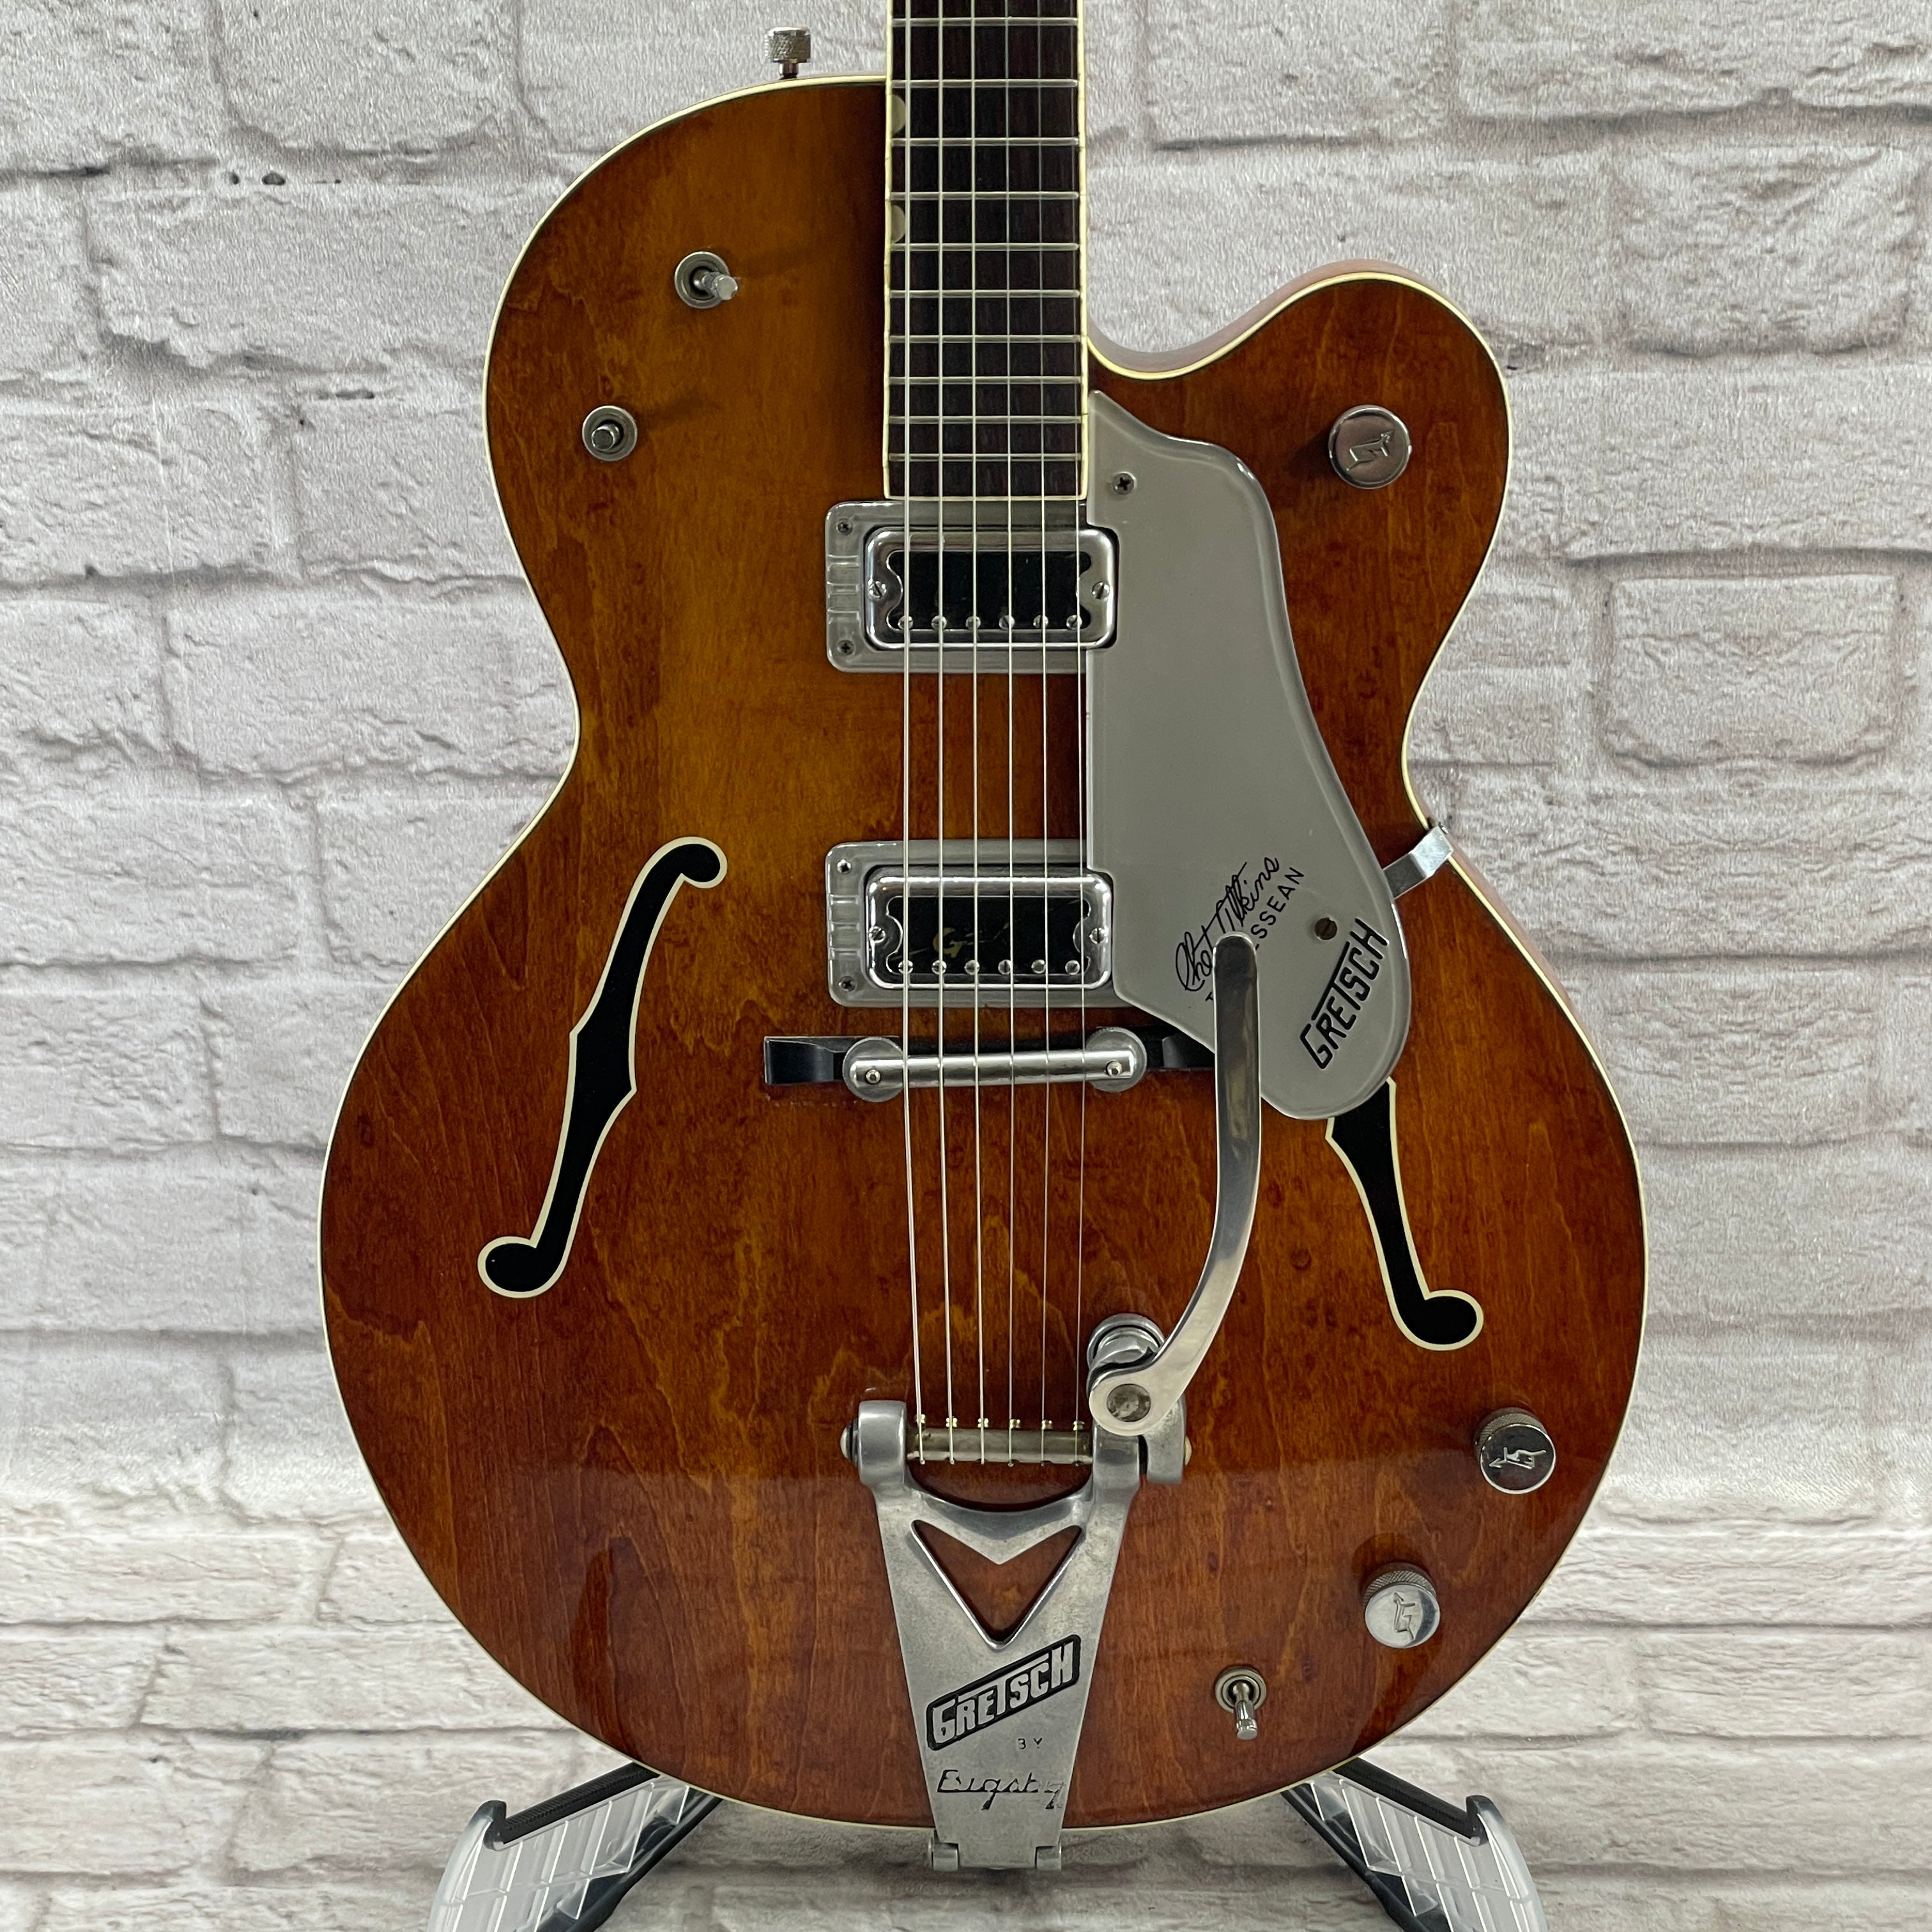 Used:  Gretsch Chet Atkins Tennessean Guitar